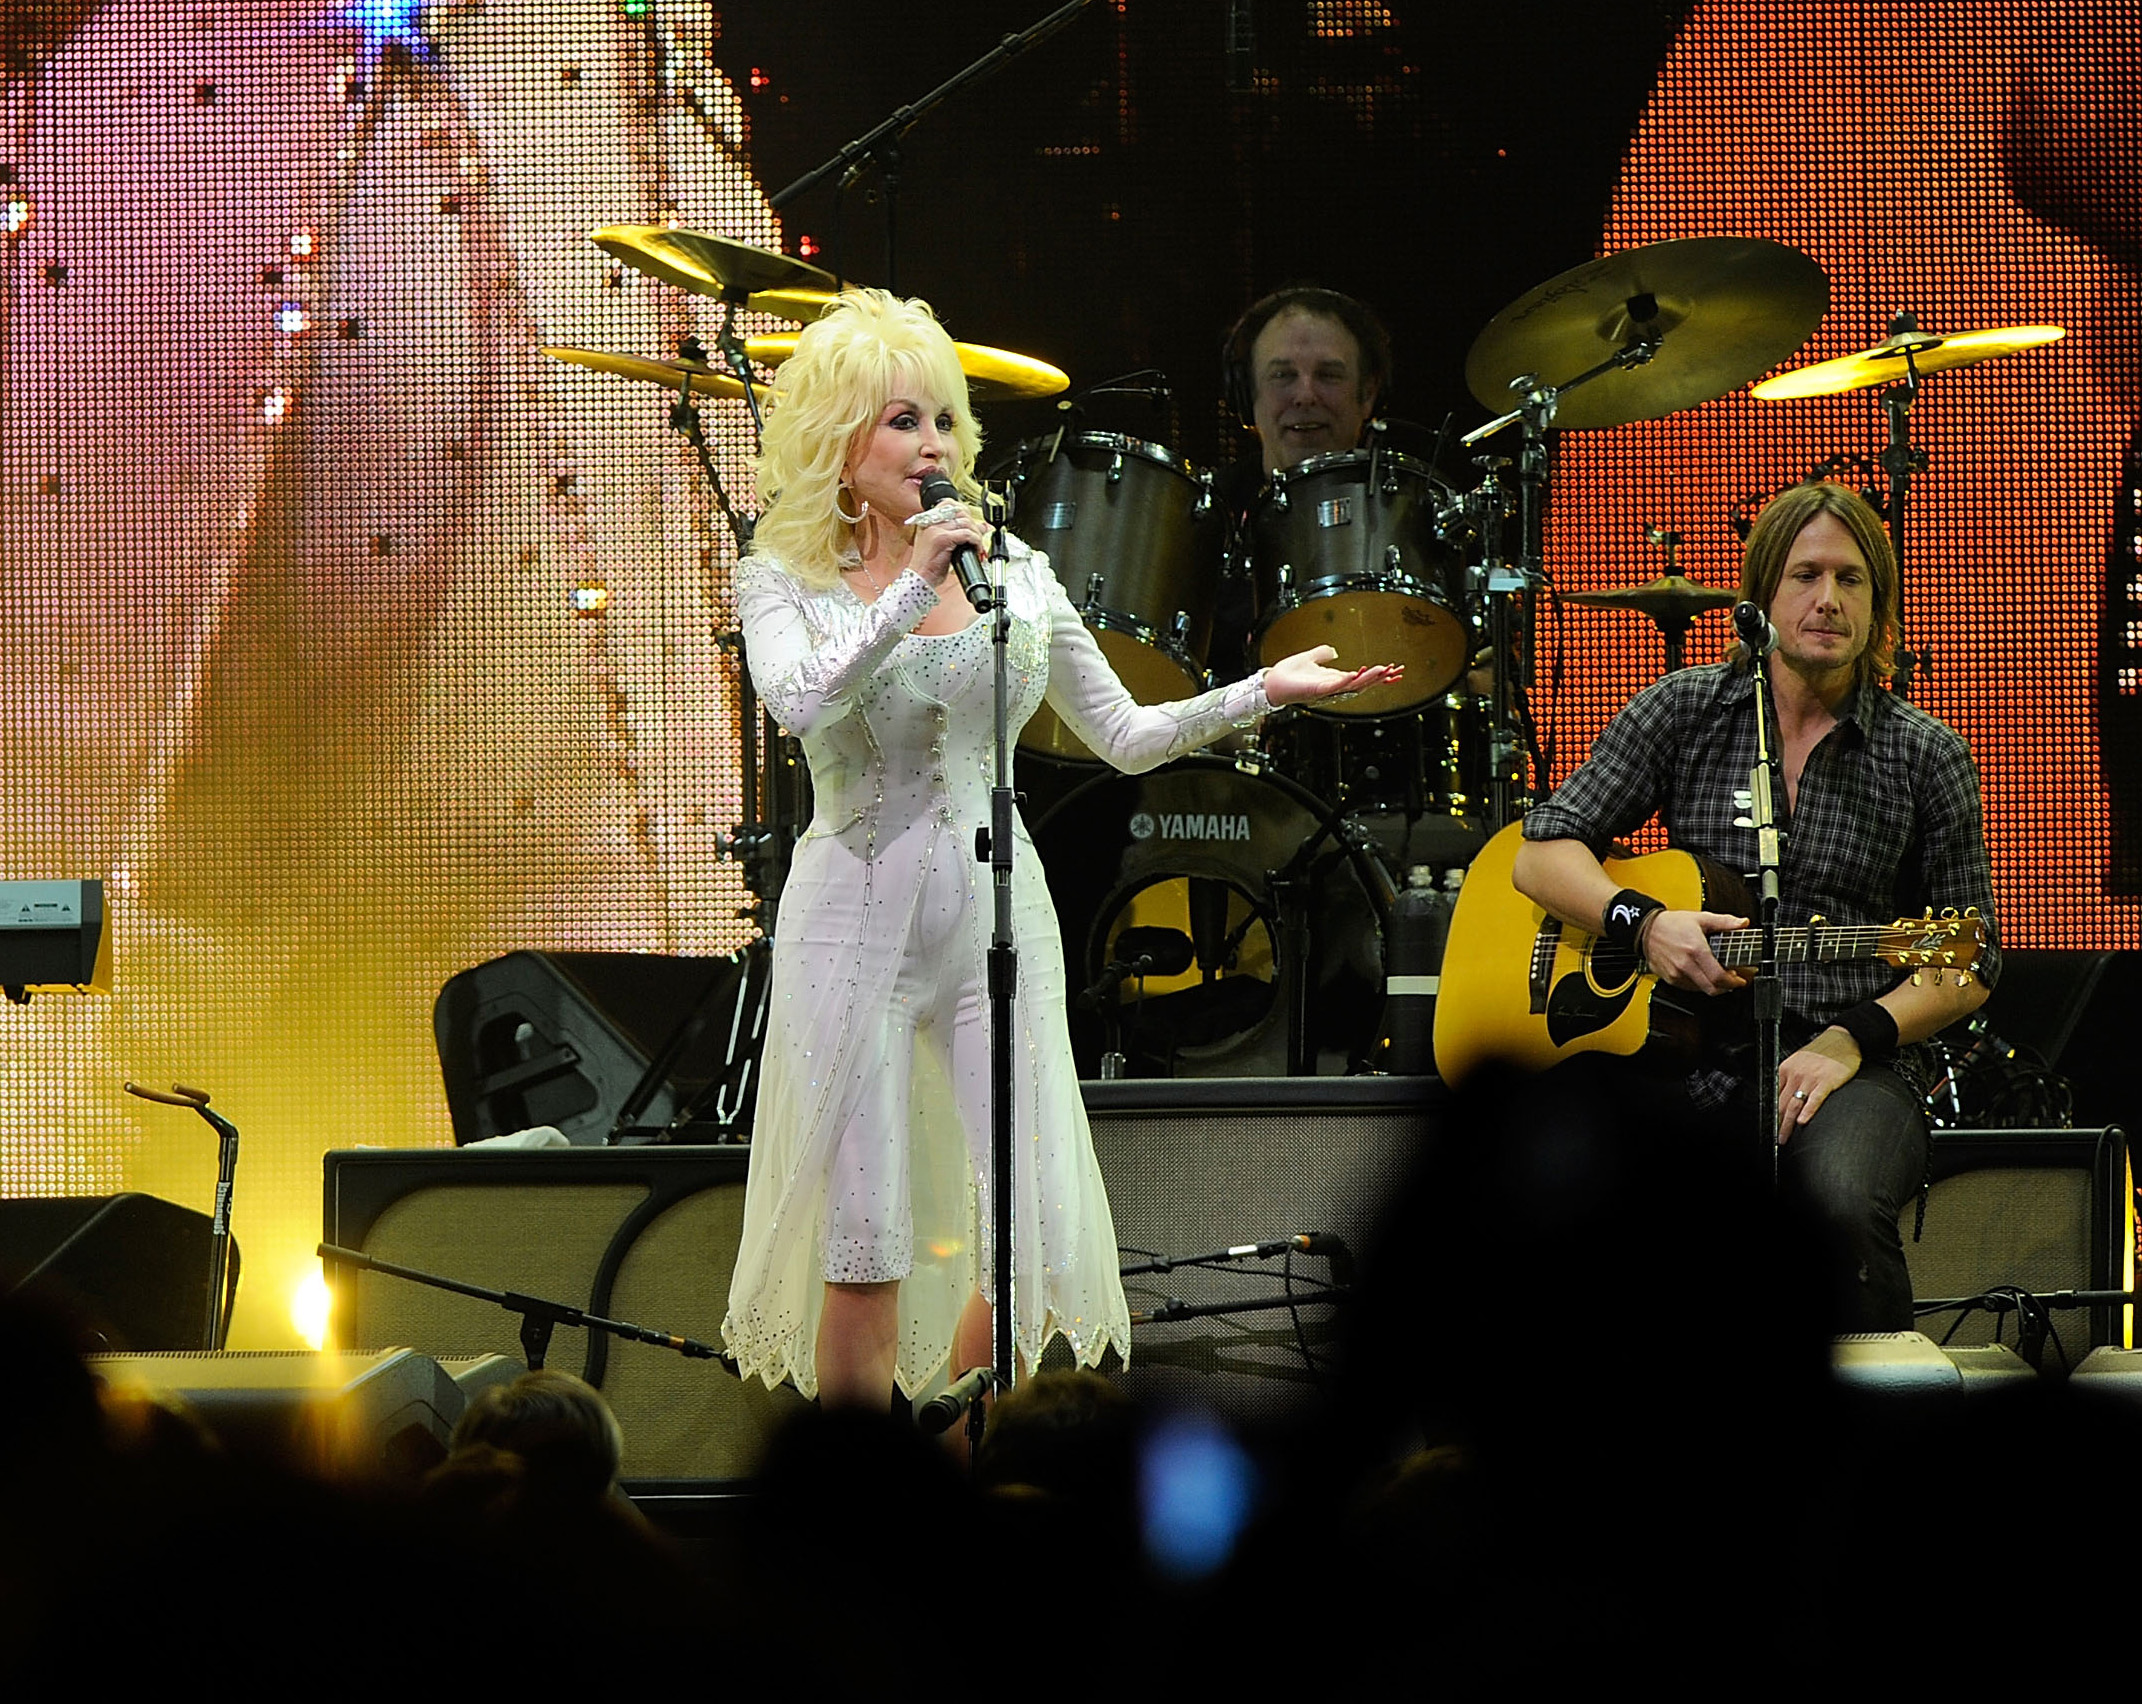 PHOTO: Dolly Parton and Keith Urban perform onstage at the 2010 We're All For The Hall benefit concert at the Bridgestone Arena on Oct. 5, 2010, in Nashville, Tenn.